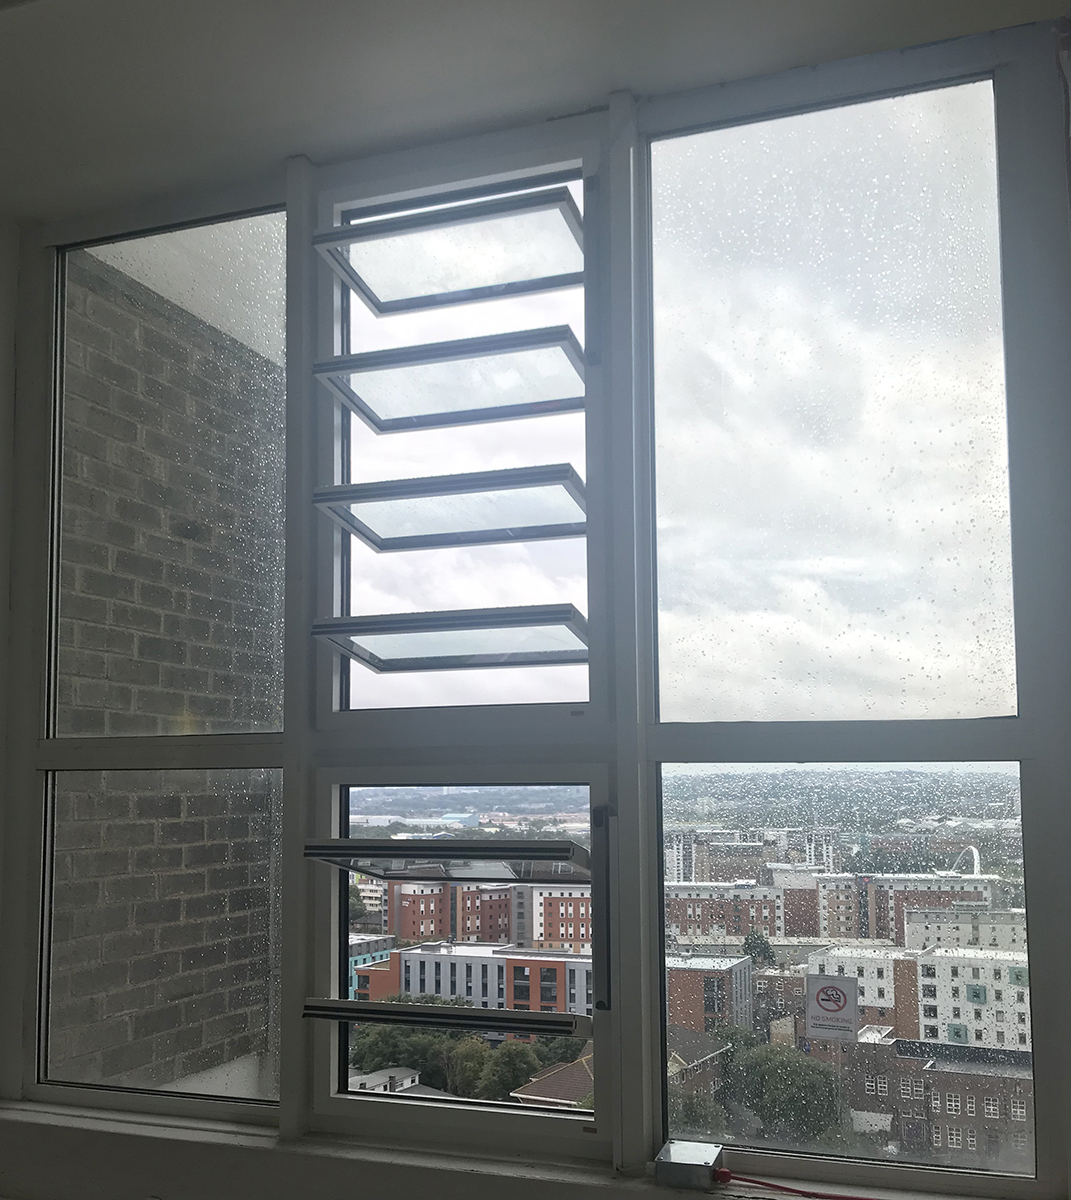 Multiple high-rise natural smoke ventilation systems for Newcastle Homes